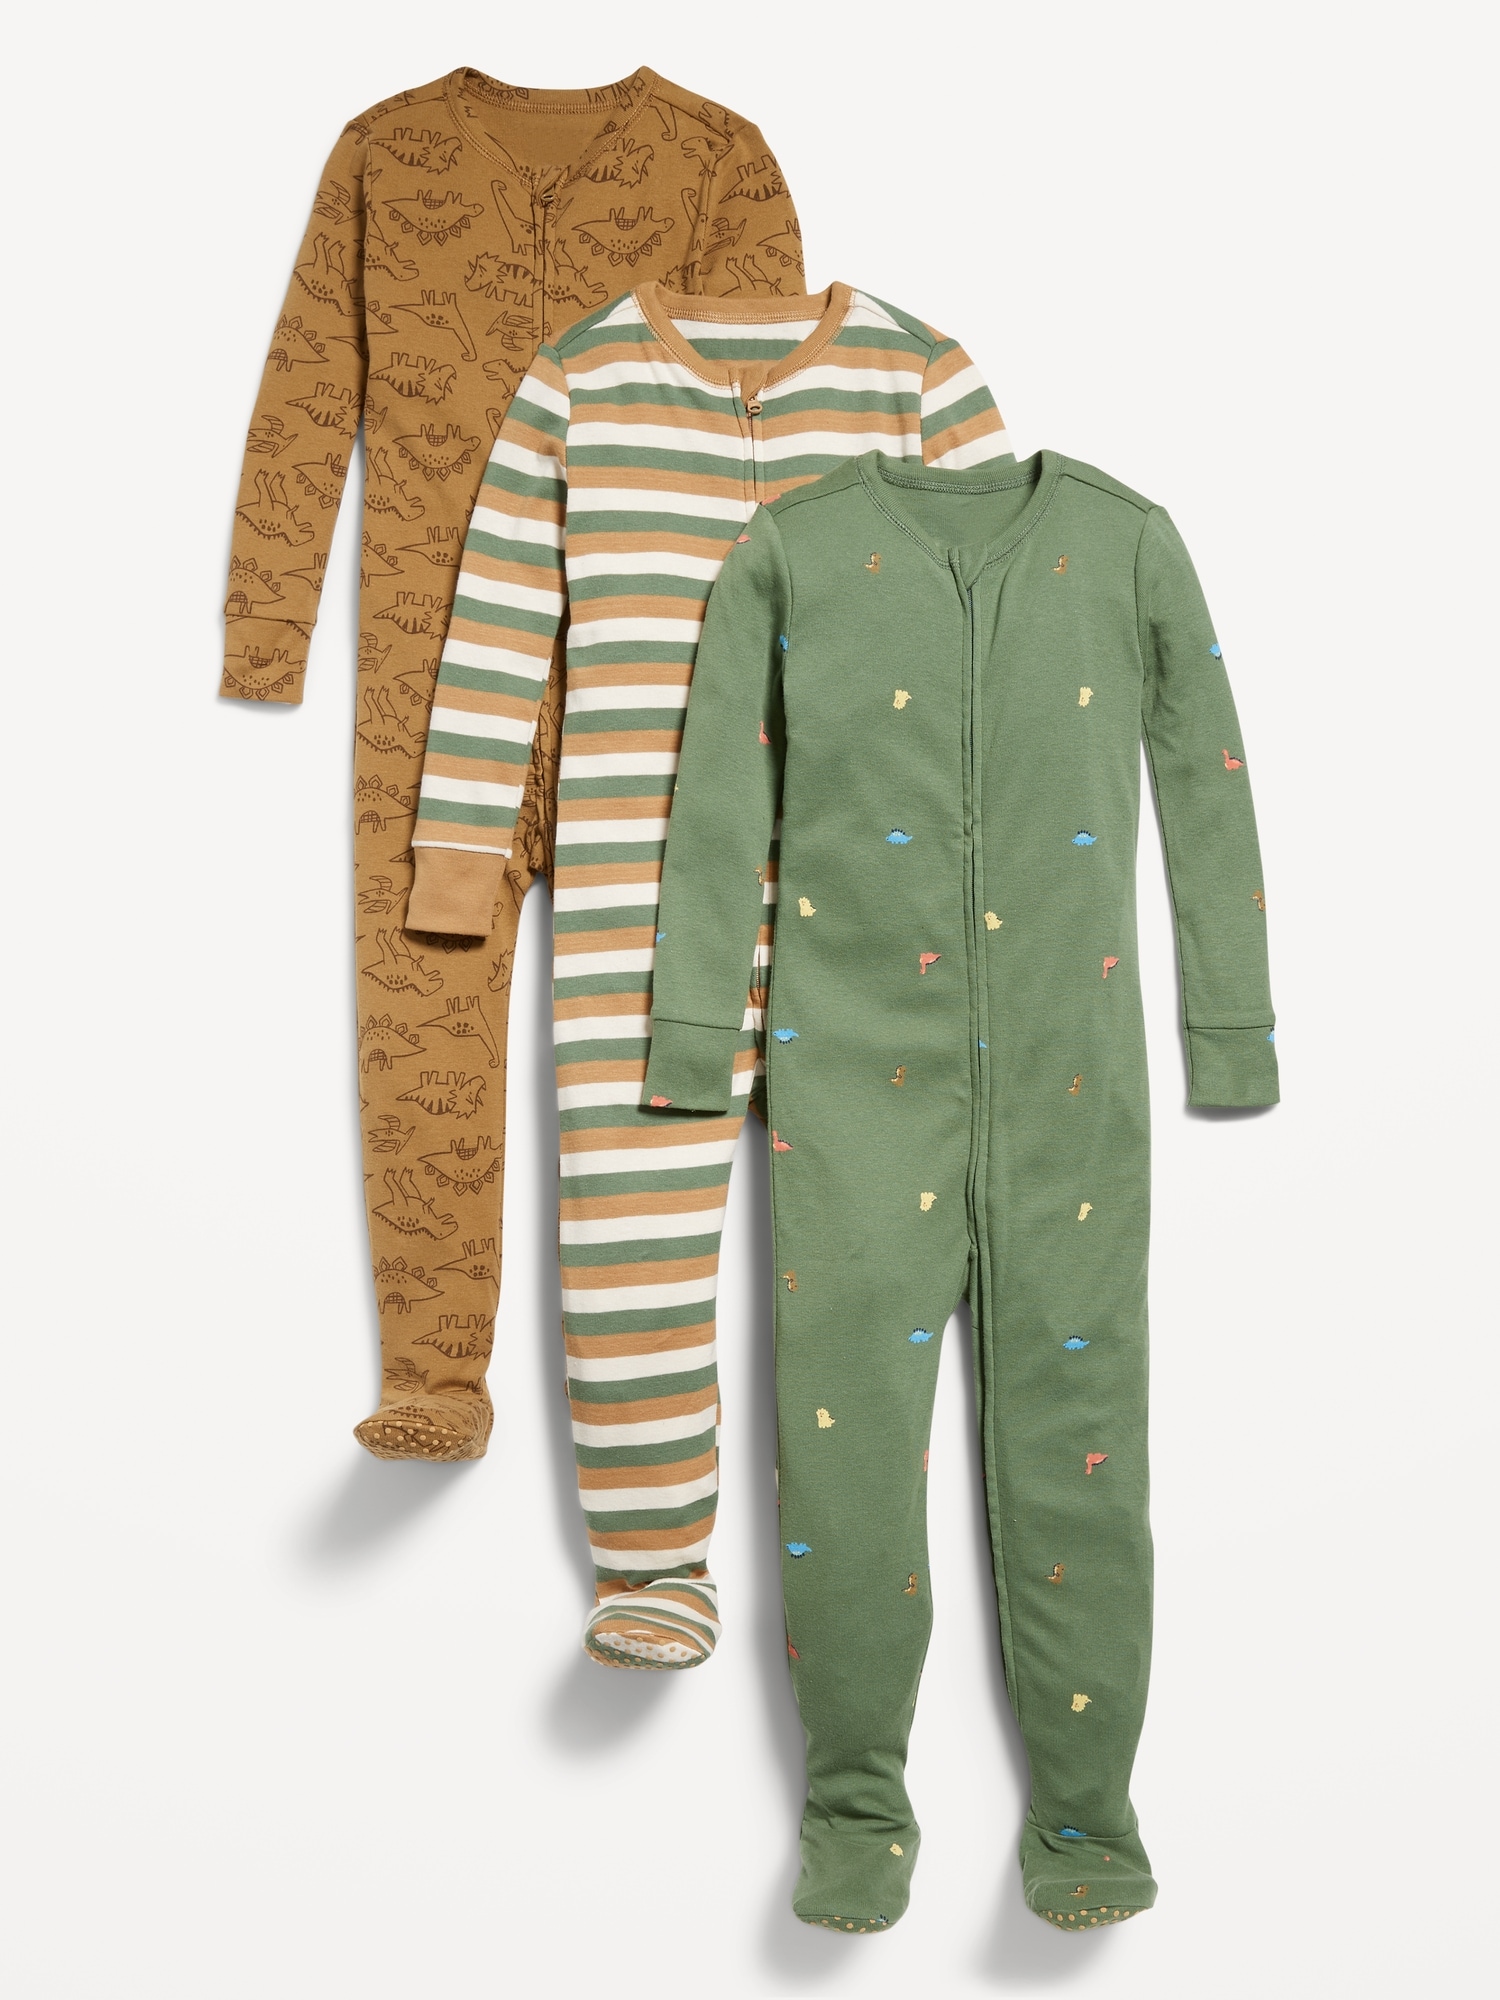 Unisex 2-Way-Zip Snug-Fit Printed Pajama One-Piece 3-Pack for Toddler & Baby